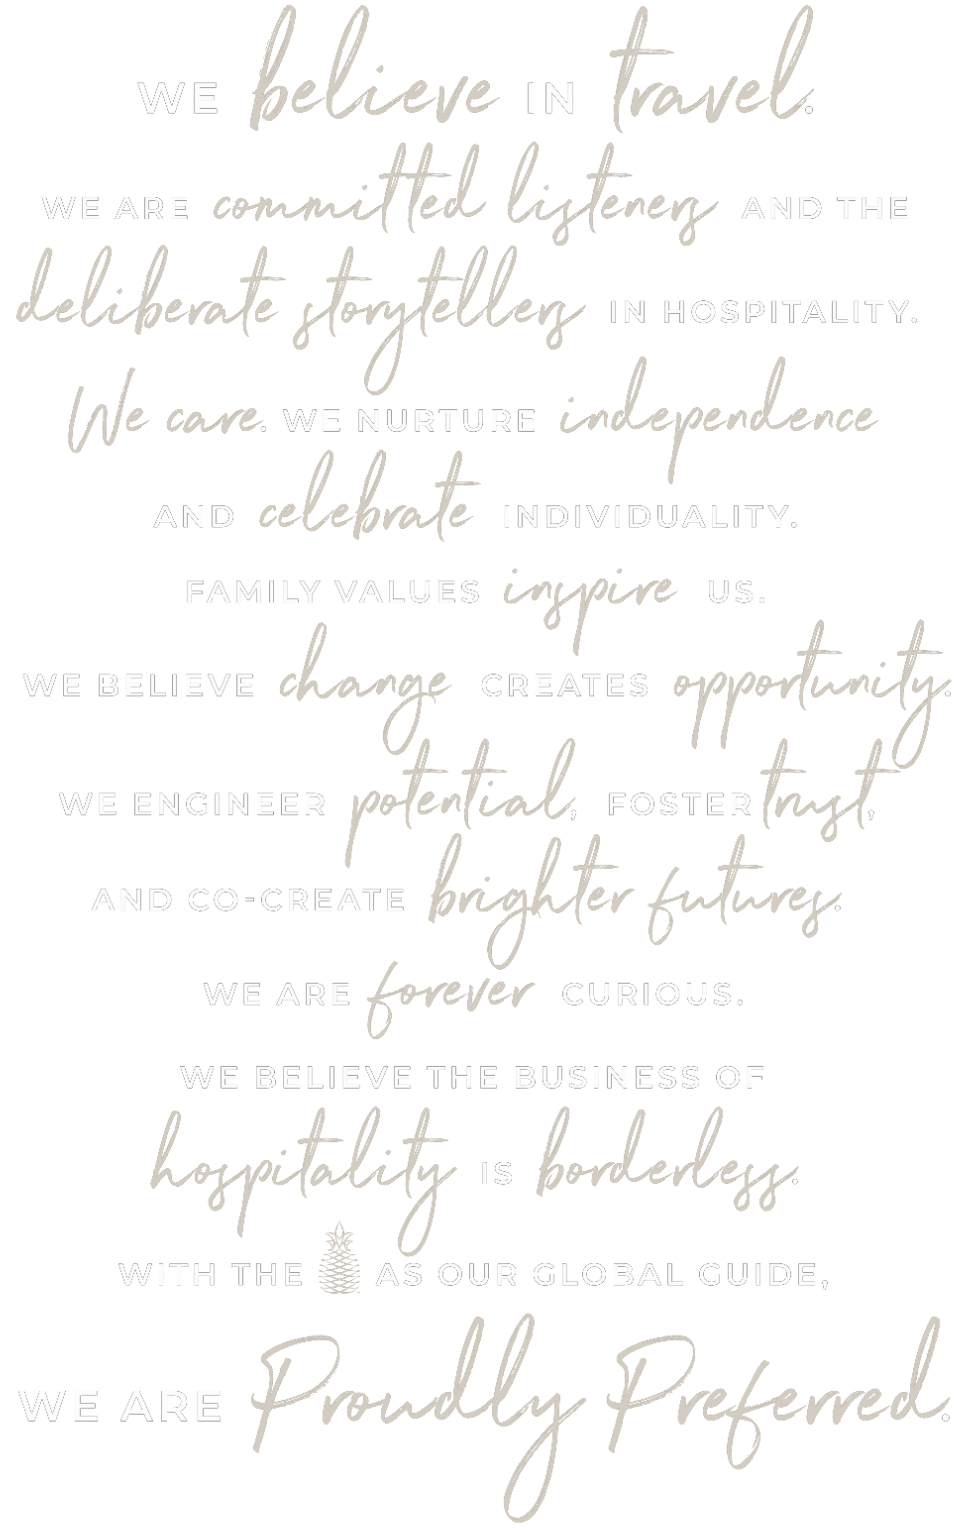 We believe in travel. We are committed listeners and deliberate storytellers in hospitality. We care. We nurture independence and celebrate individuality. Family values inspire us. We believe change creates opportunity. We engineer potential, foster trust, and co-create brighter futures. We are forever curious. We believe the business of hospitality is borderless. With the pineapple as our global guide, we are proudly preferred.